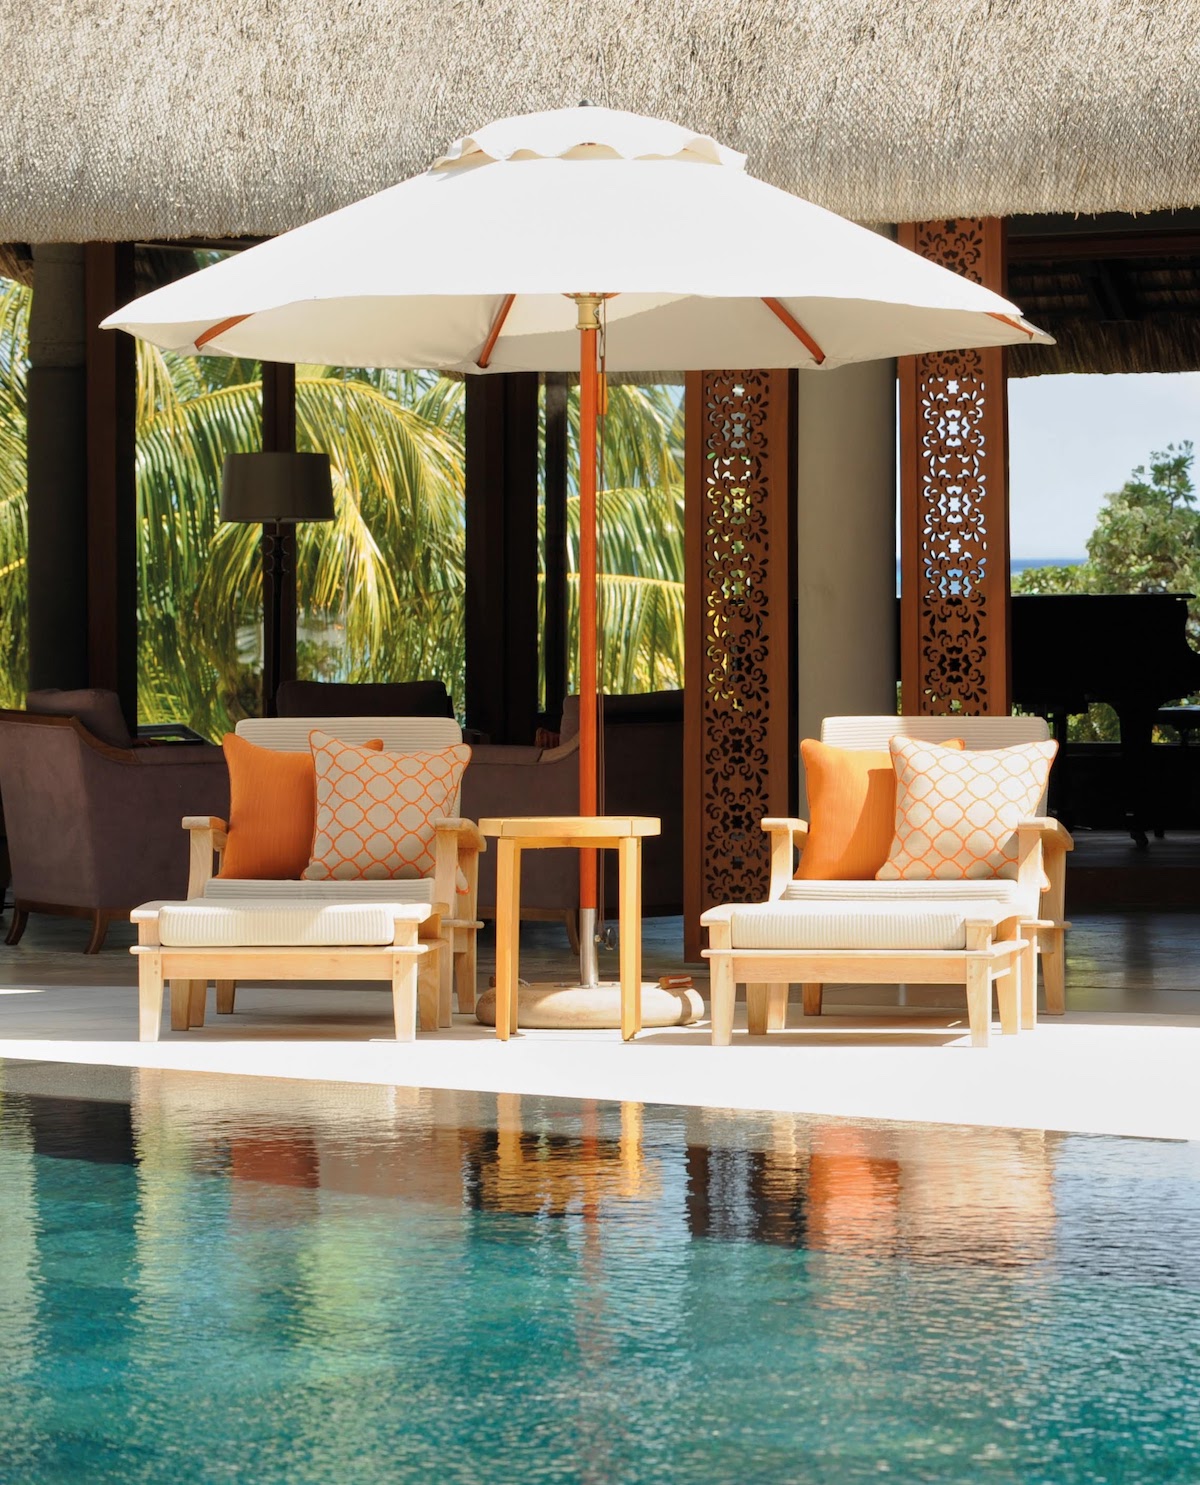 Royal Palm Mauritius - sun bed by pool